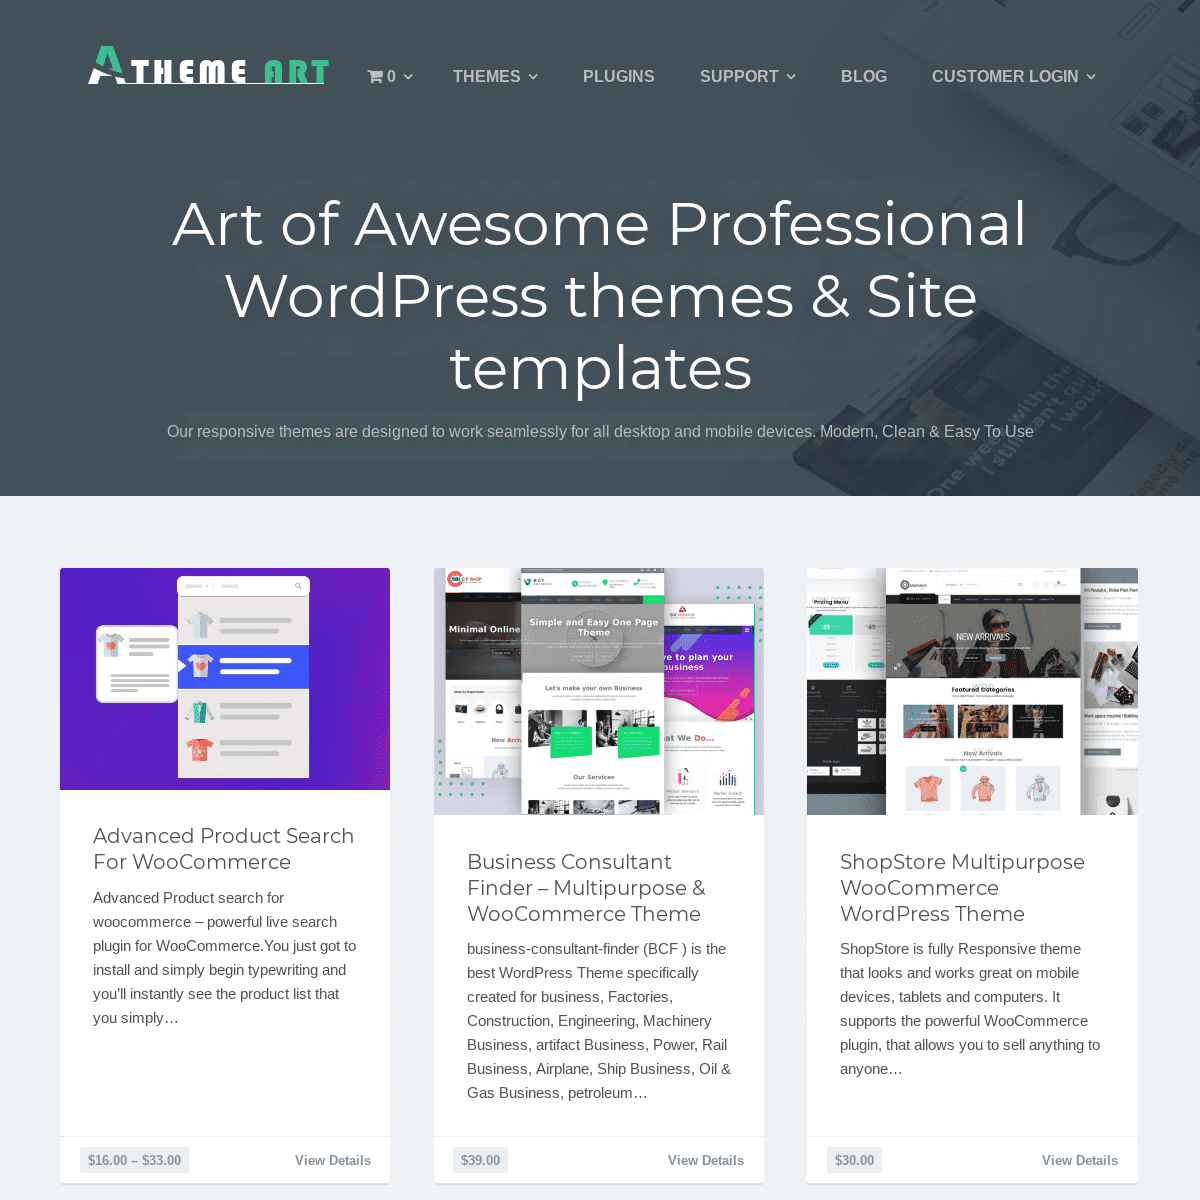 Art of Awesome Professional WordPress themes & Site templates - AThemeArt